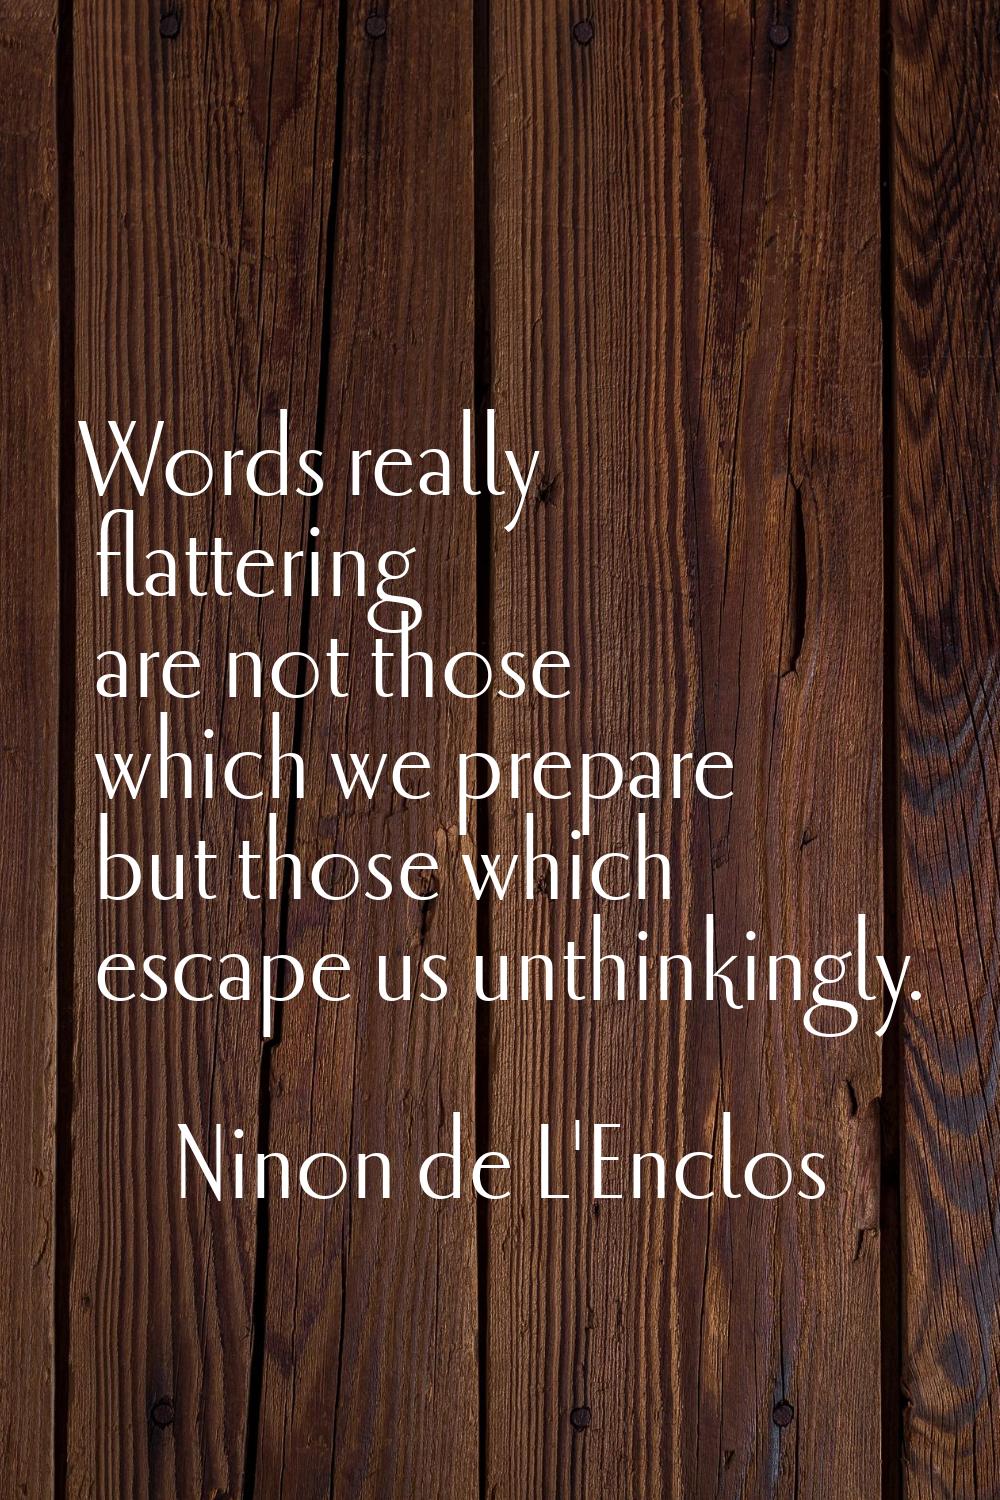 Words really flattering are not those which we prepare but those which escape us unthinkingly.